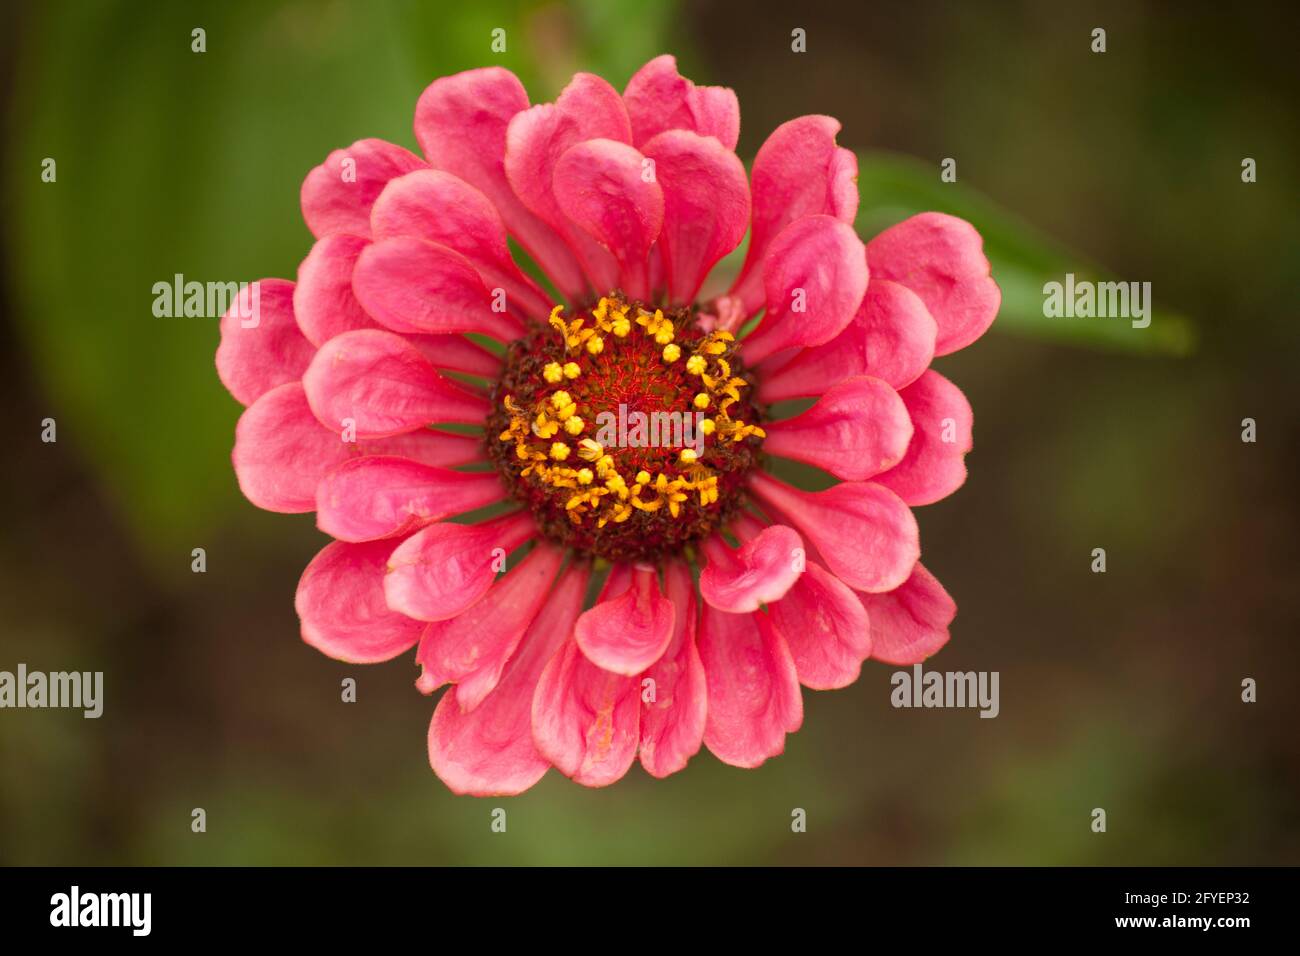 Detail of pink zinnia flower with open petals in a garden over green leaves Stock Photo